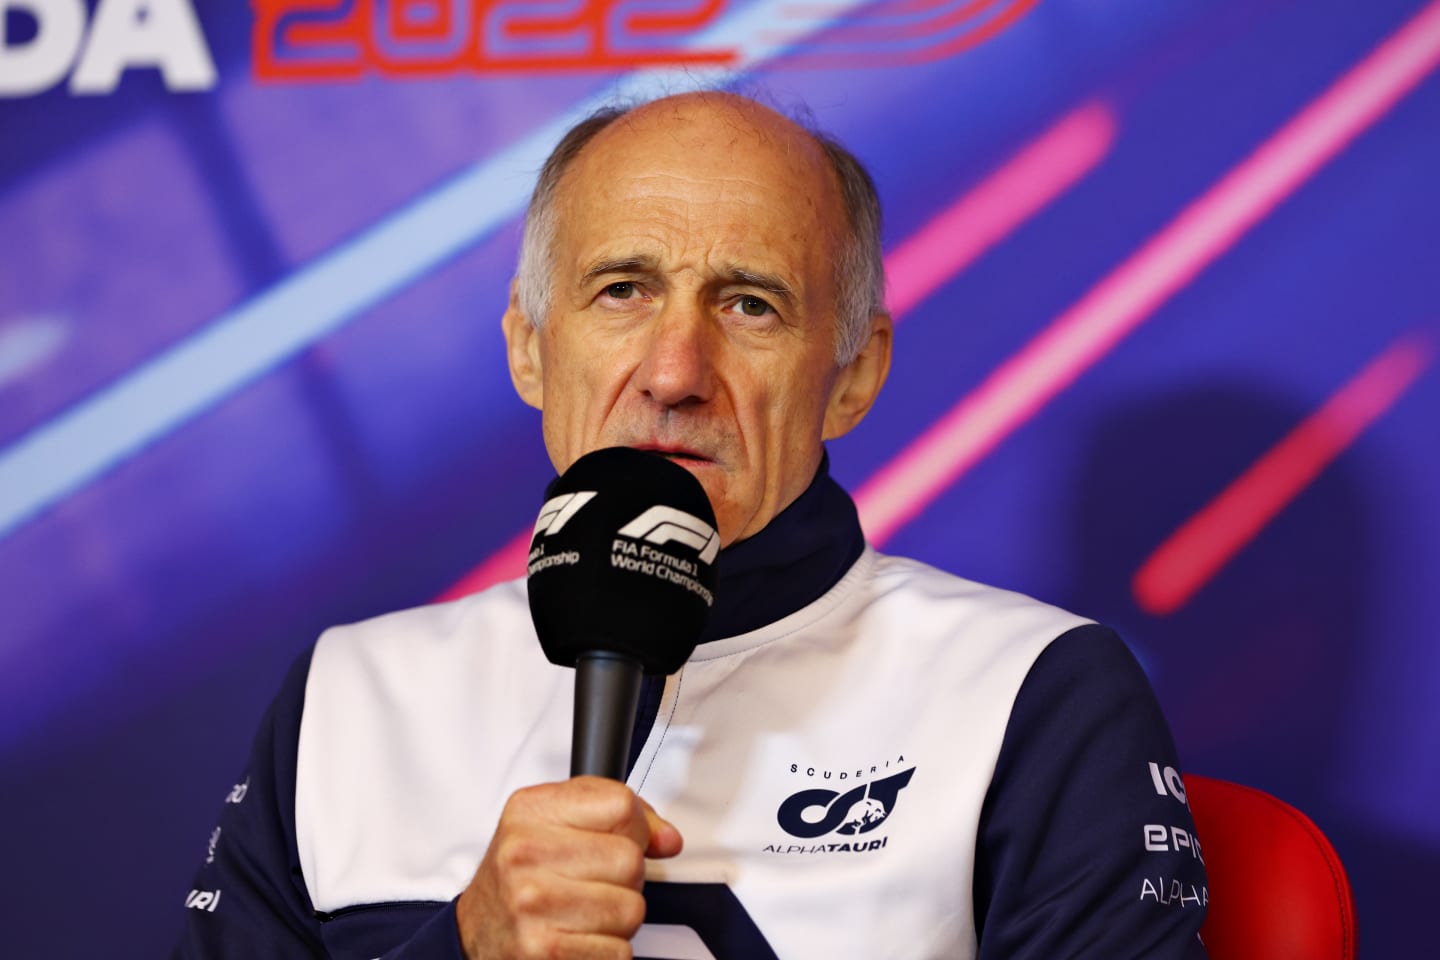 MONTREAL, QUEBEC - JUNE 18: Scuderia AlphaTauri Team Principal Franz Tost talks in the Team Principals Press Conference prior to final practice ahead of the F1 Grand Prix of Canada at Circuit Gilles Villeneuve on June 18, 2022 in Montreal, Quebec. (Photo by Clive Rose/Getty Images)